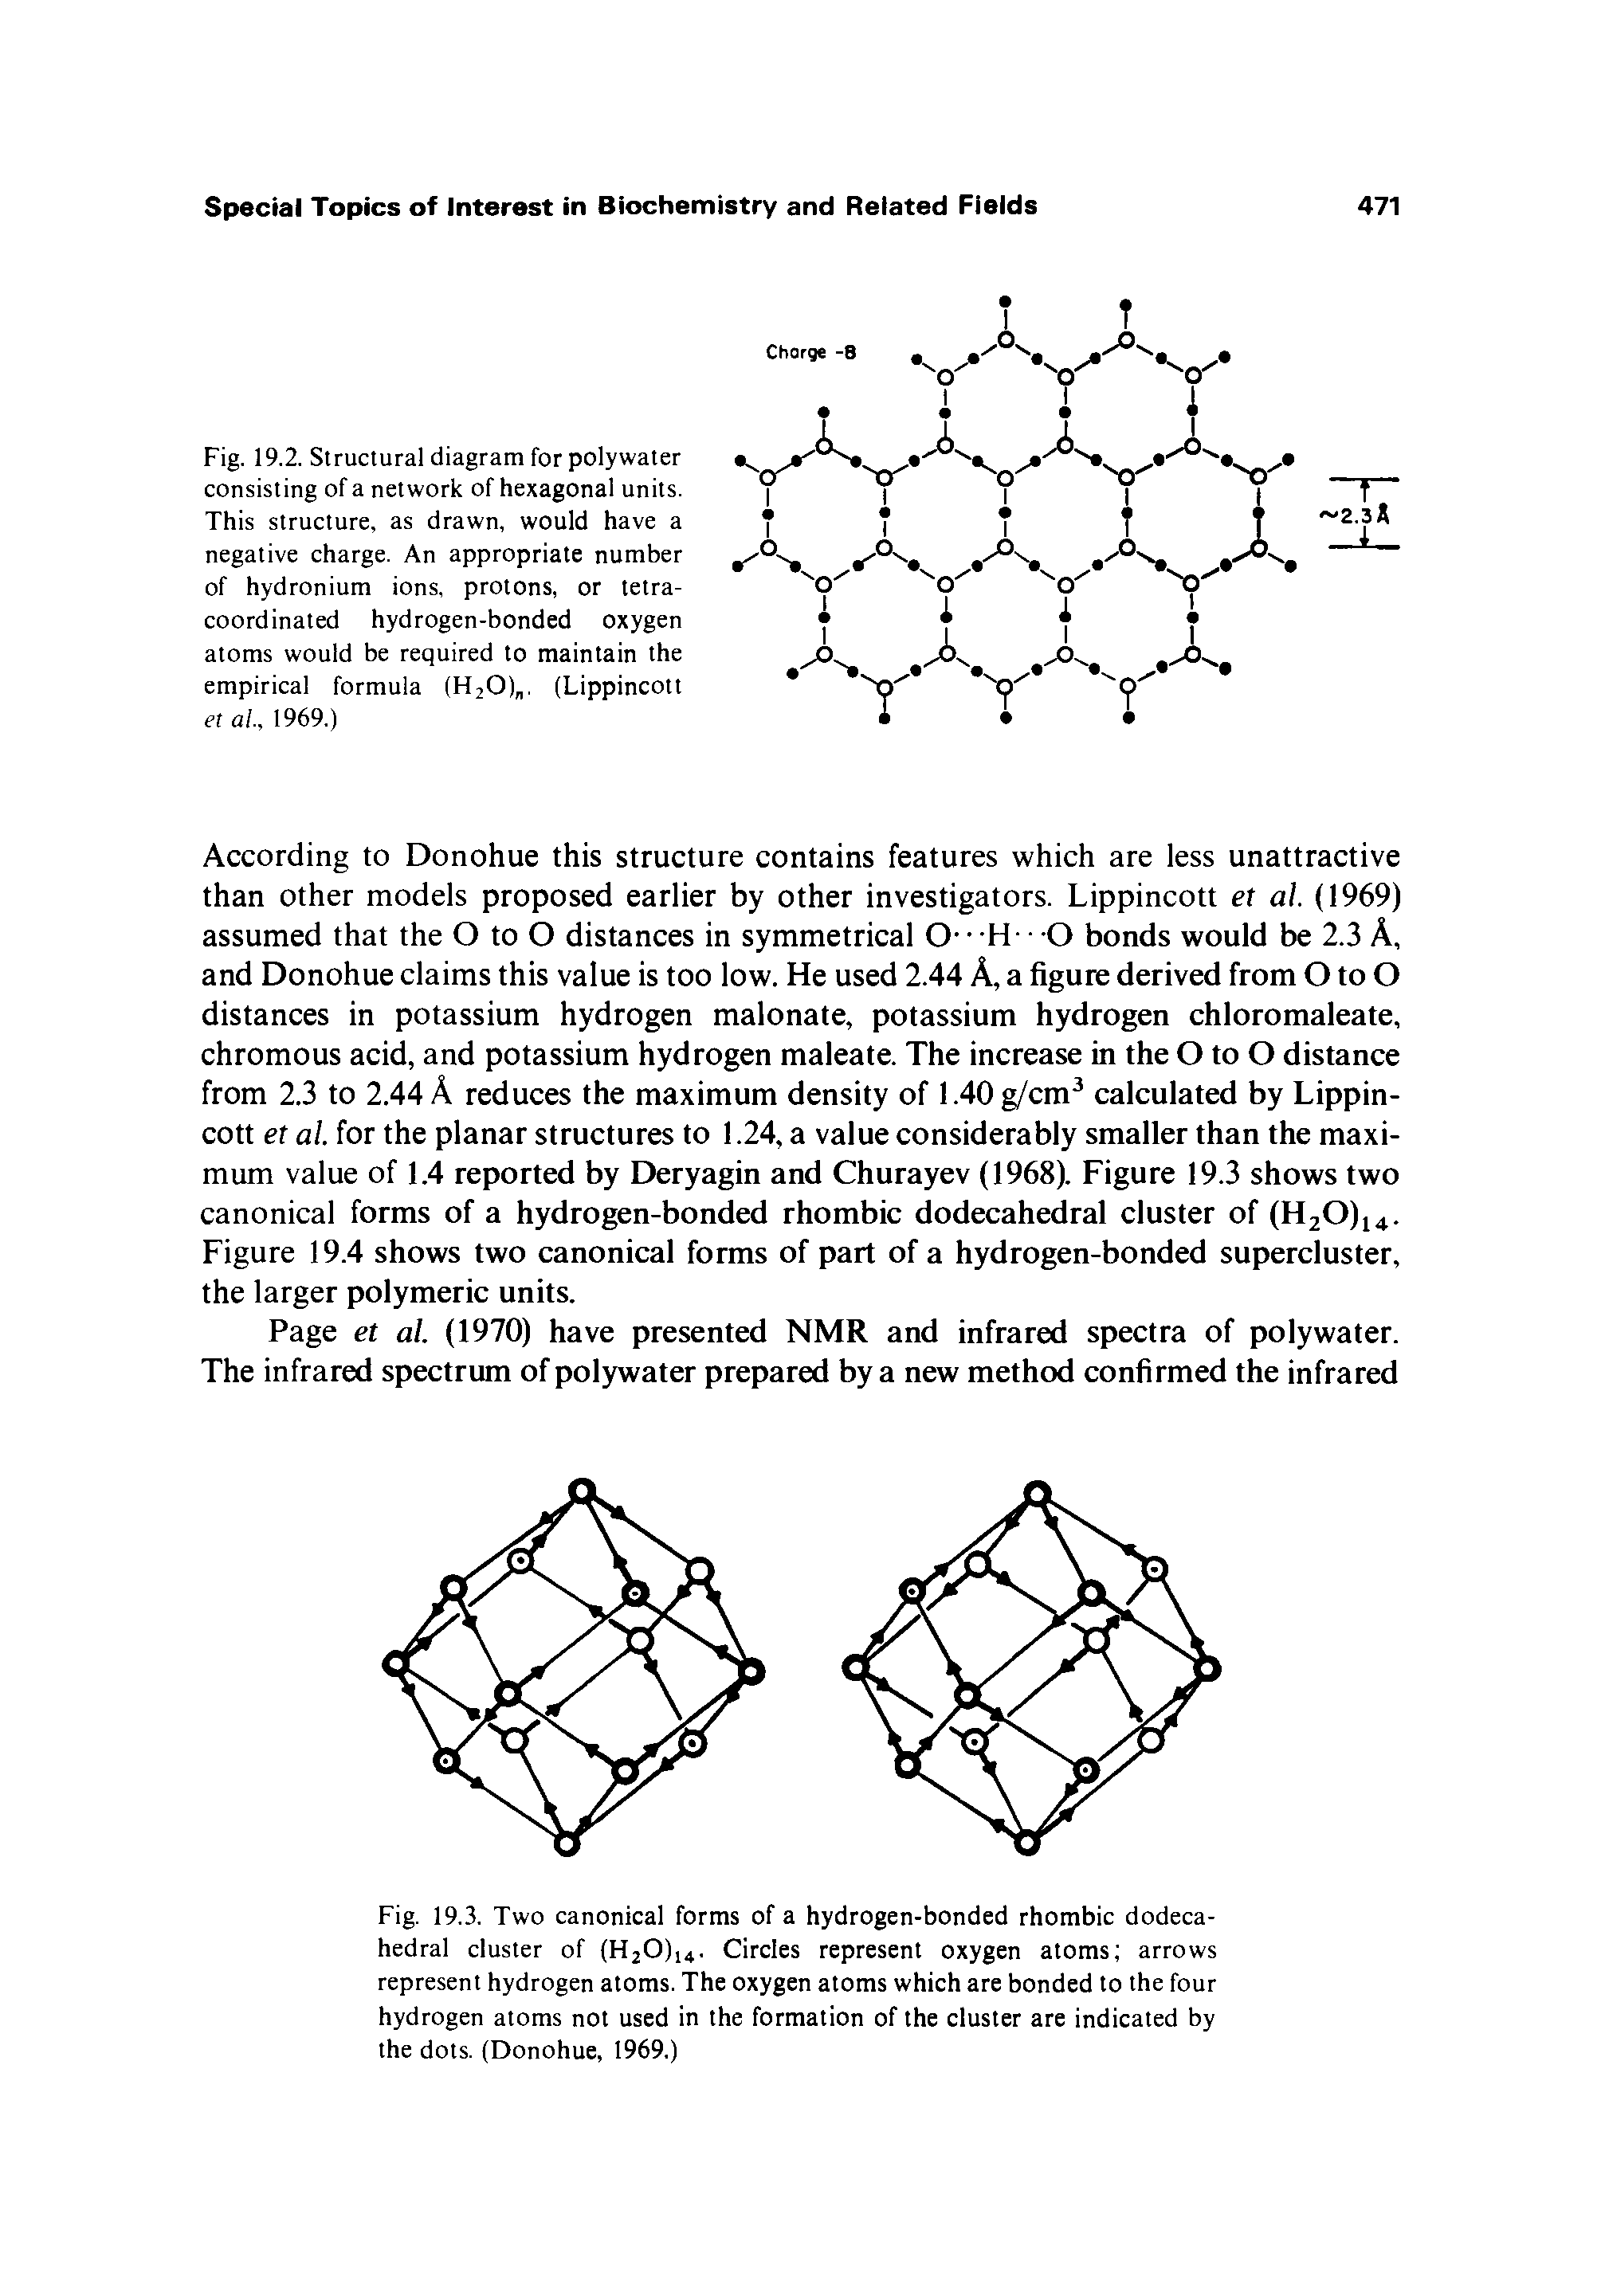 Fig. 19.2. Structural diagram for polywater consisting of a network of hexagonal units. This structure, as drawn, would have a negative charge. An appropriate number of hydronium ions, protons, or tetra-coordinated hydrogen-bonded oxygen atoms would be required to maintain the empirical formula (HjO),. (Lippincott et aU 1969.)...